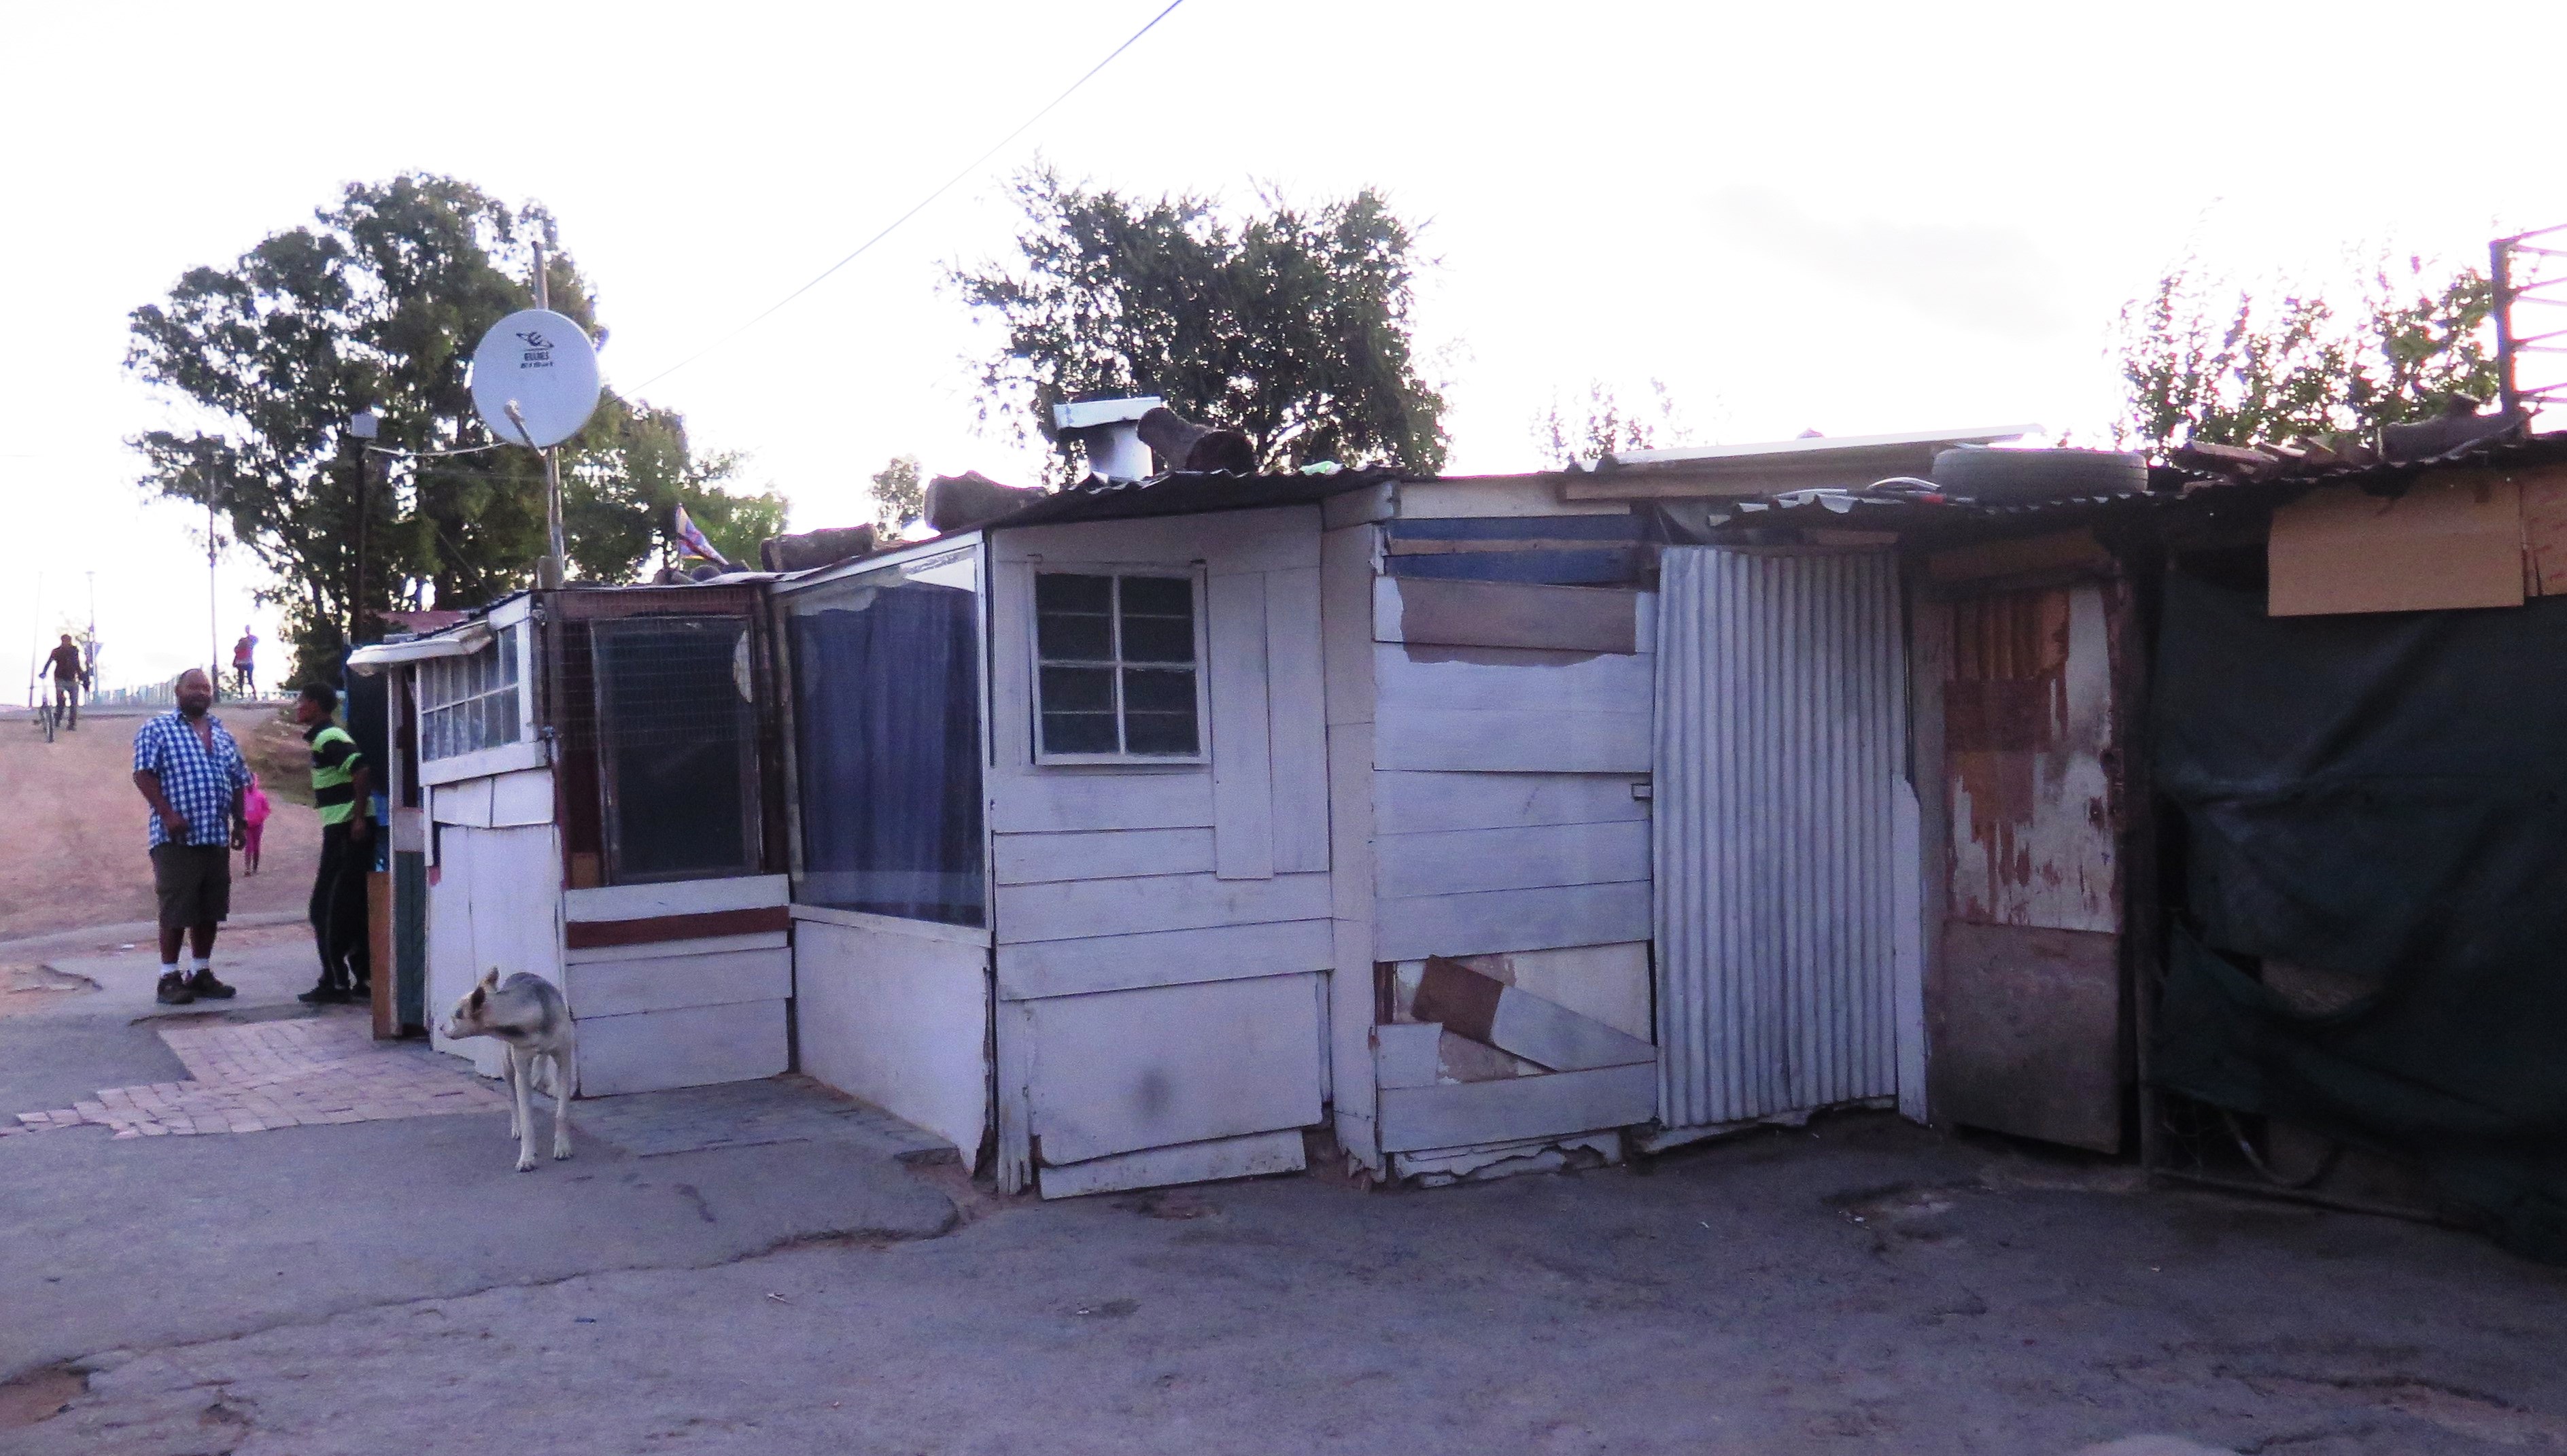 Photo of wendy houses built on with shacks